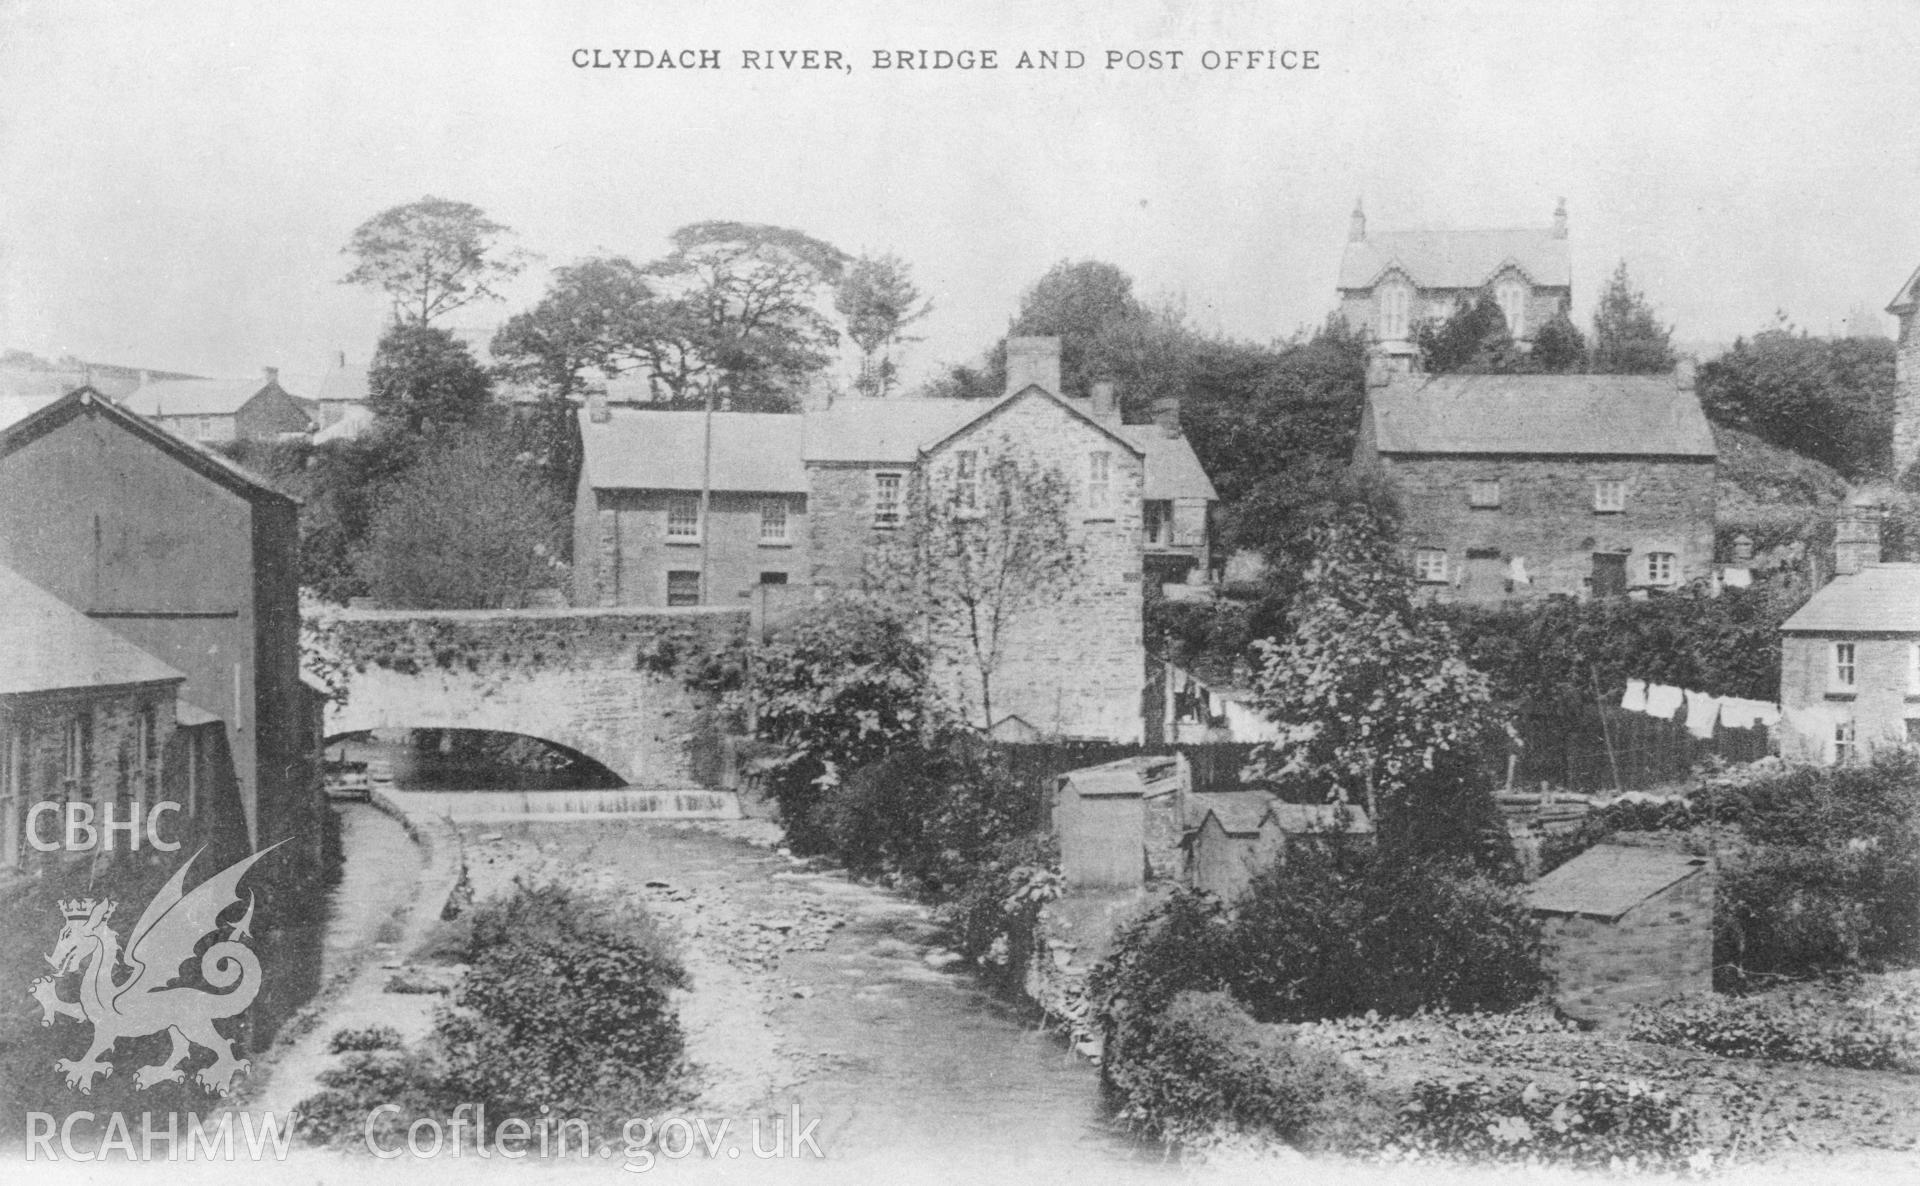 Black and white acetate negative showing Clydach River Bridge and Post Office.